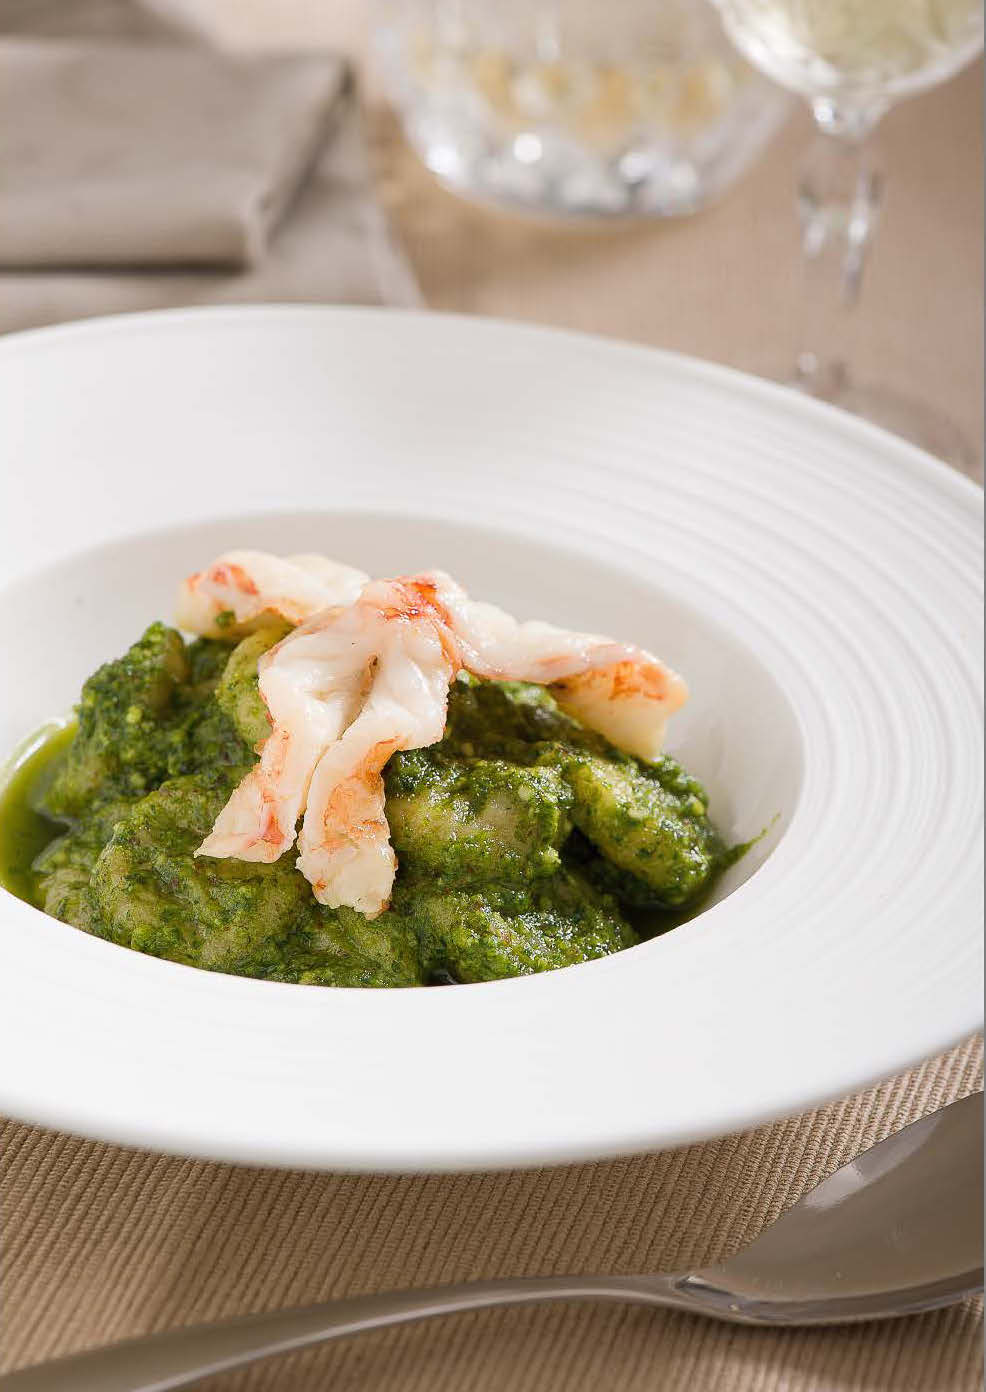 Gluten-free gnocchi of amaranth and potatoes with scampi and pesto 